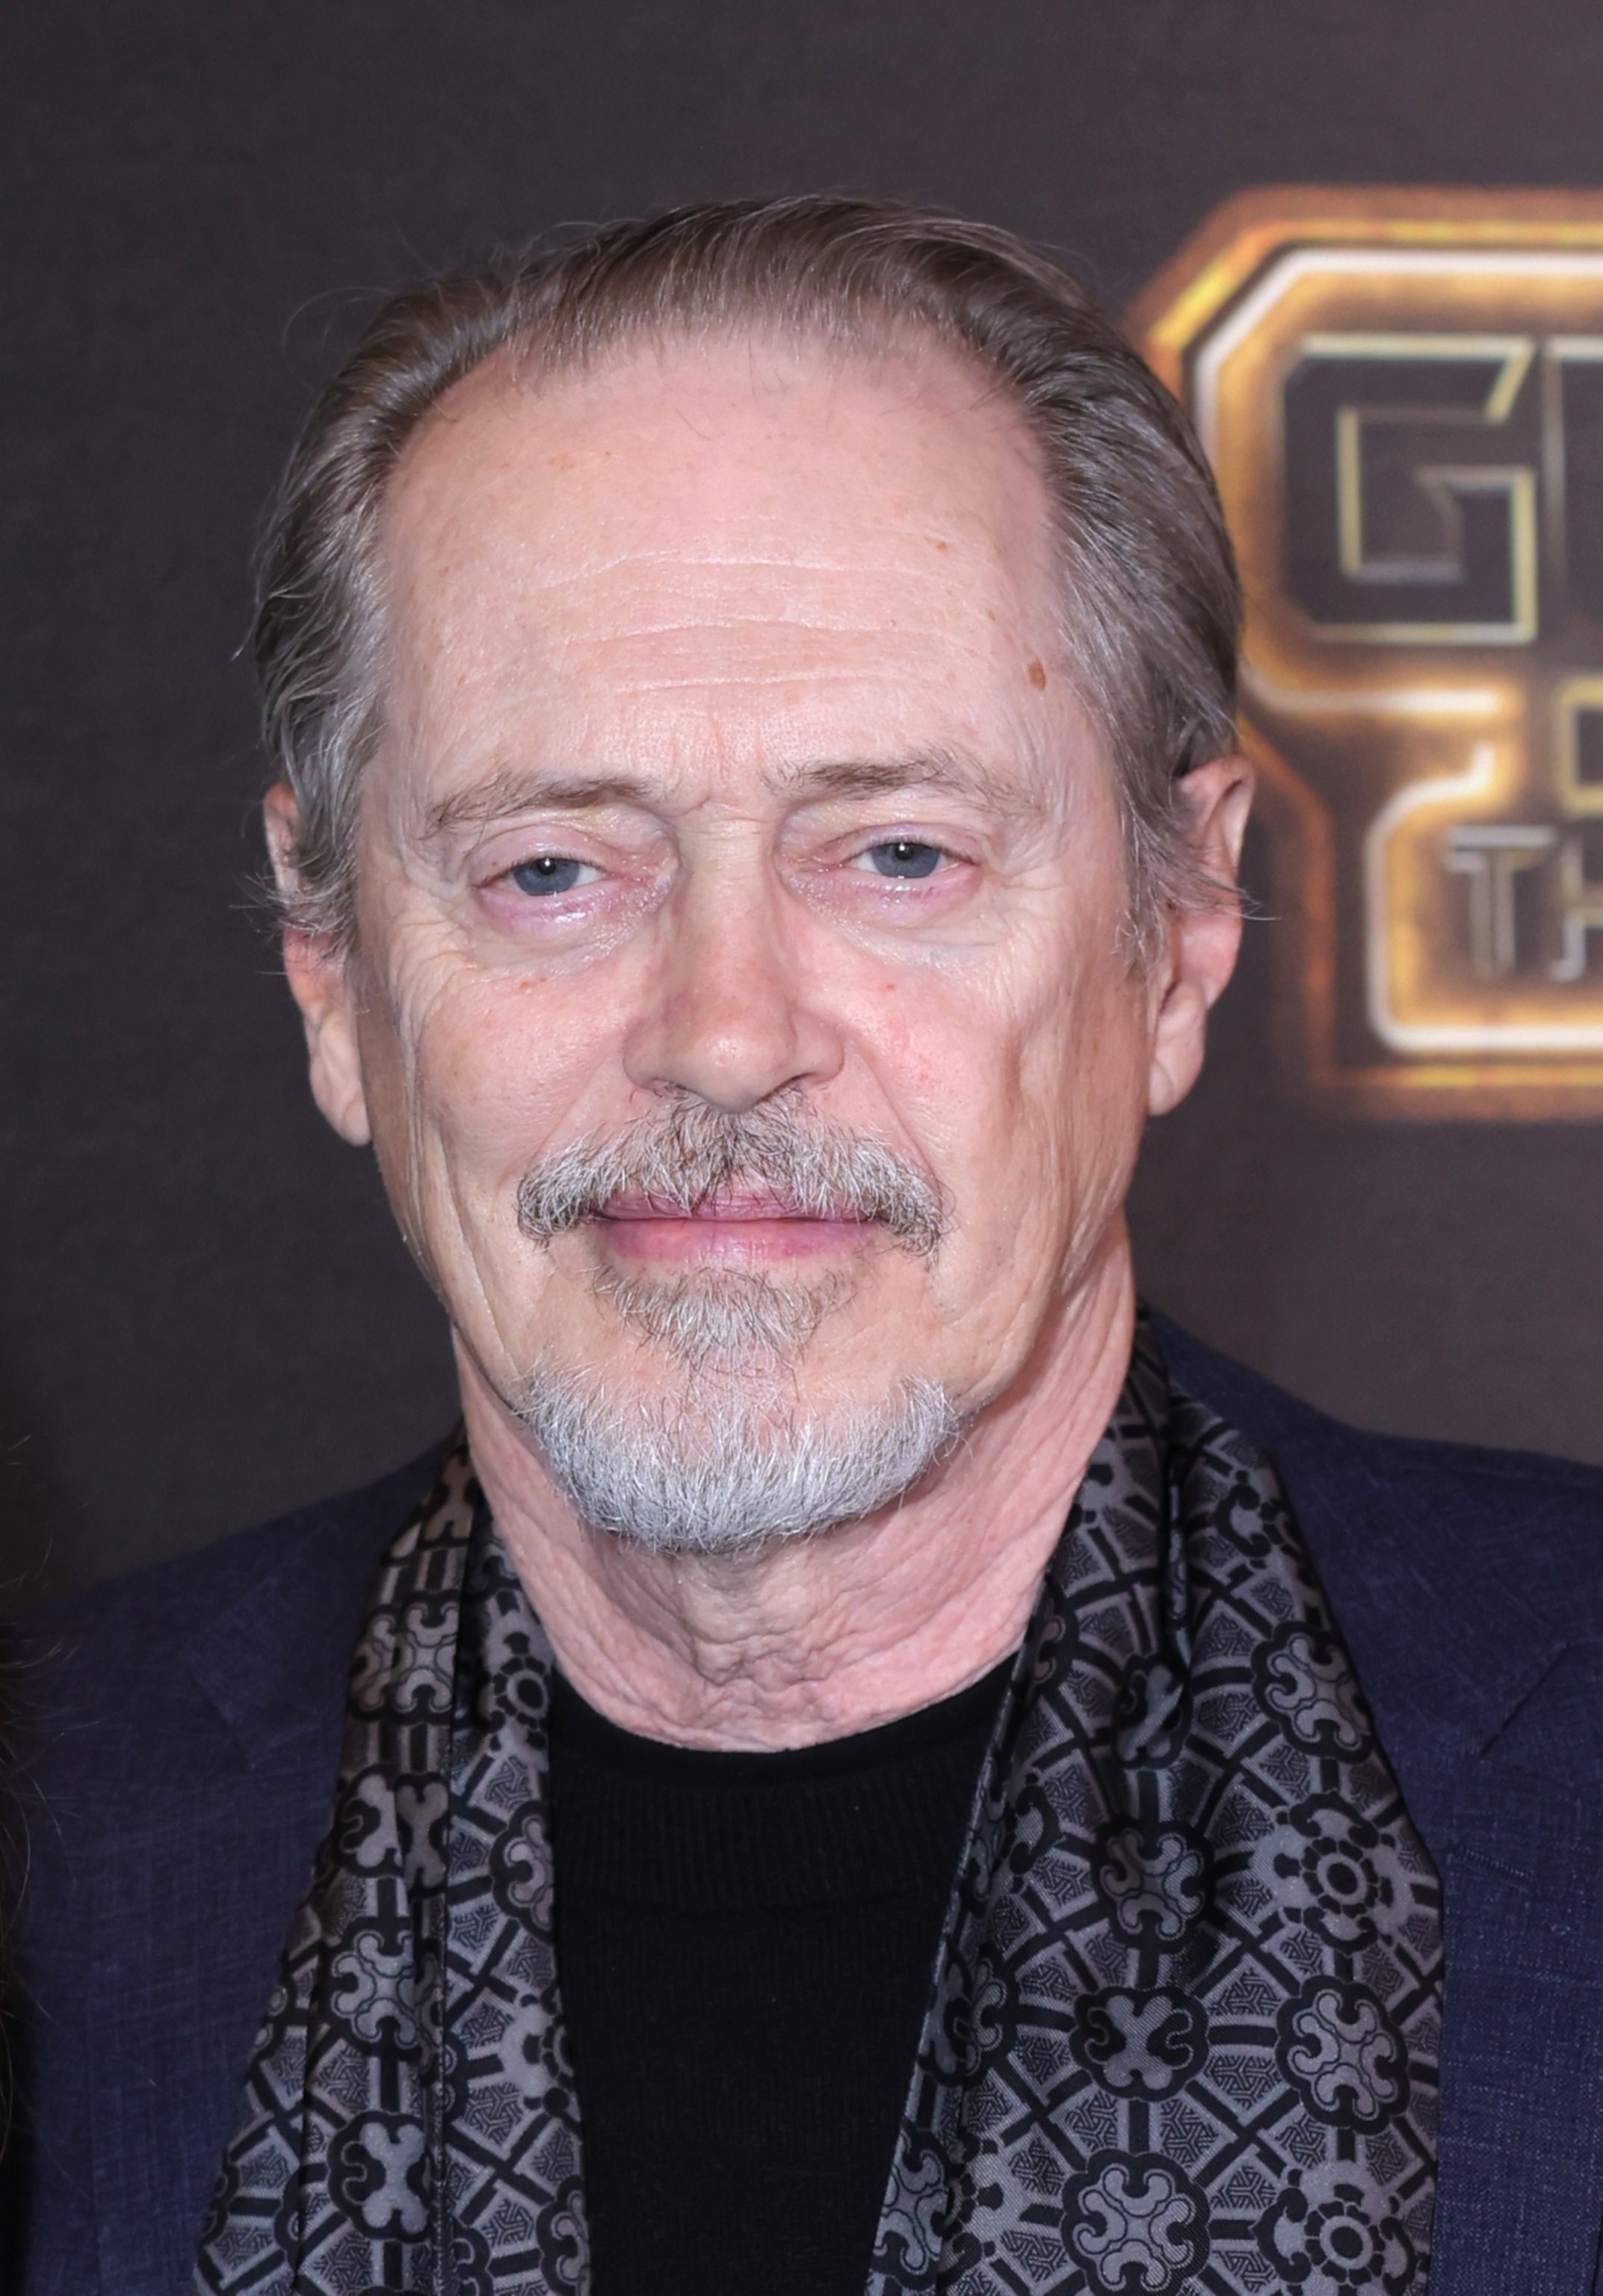 PHOTO: Steve Buscemi attends the Marvel Studio's "Guardians Of The Galaxy Vol. 3" New York Screening at iPic Theater on May 3, 2023 in New York City.